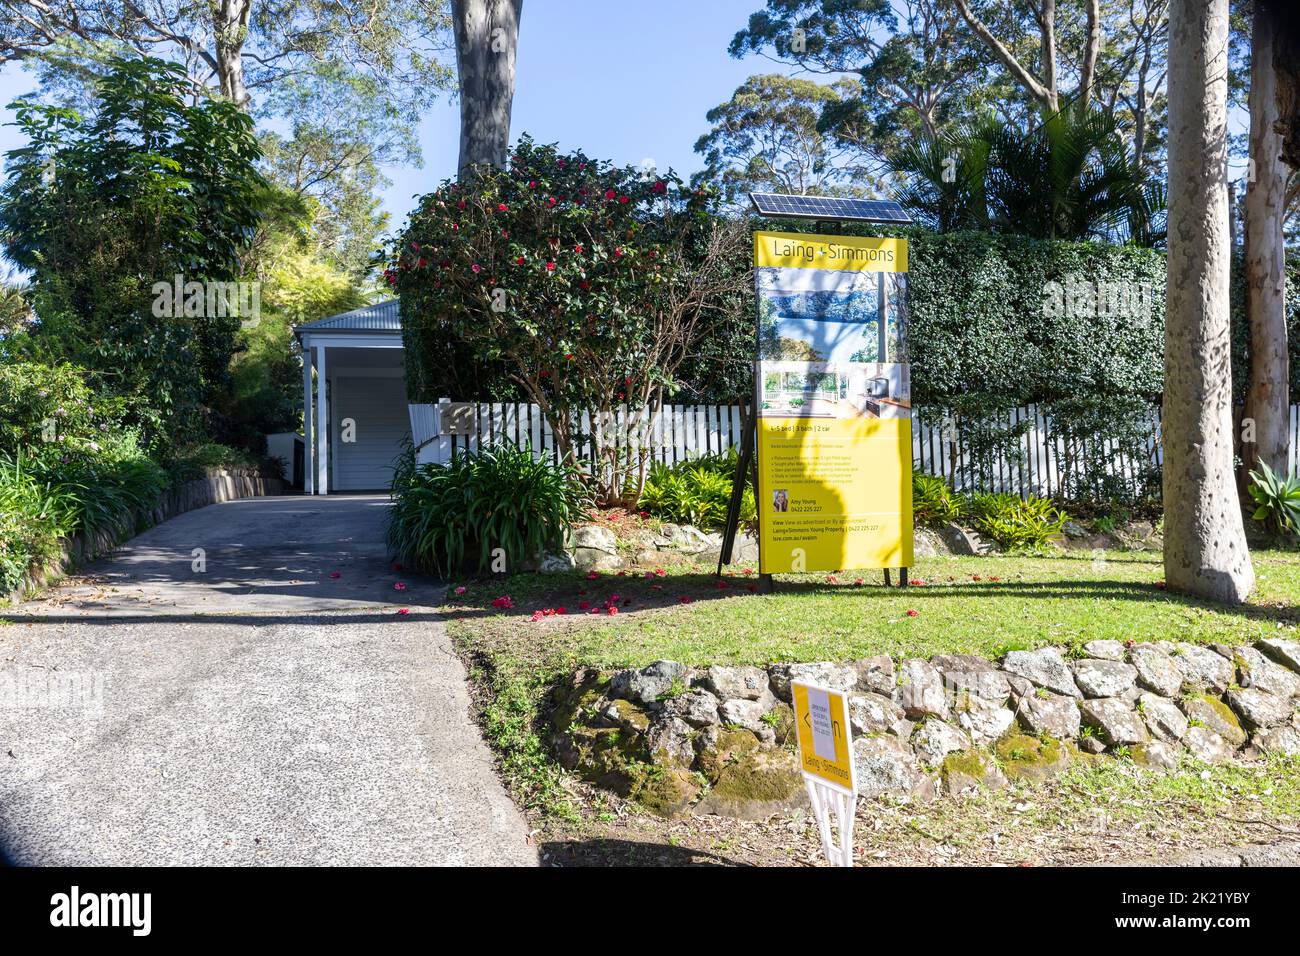 Australian detached house for sale in Avalon Beach,Sydney with real estate agents marketing sign outside,Australia Stock Photo